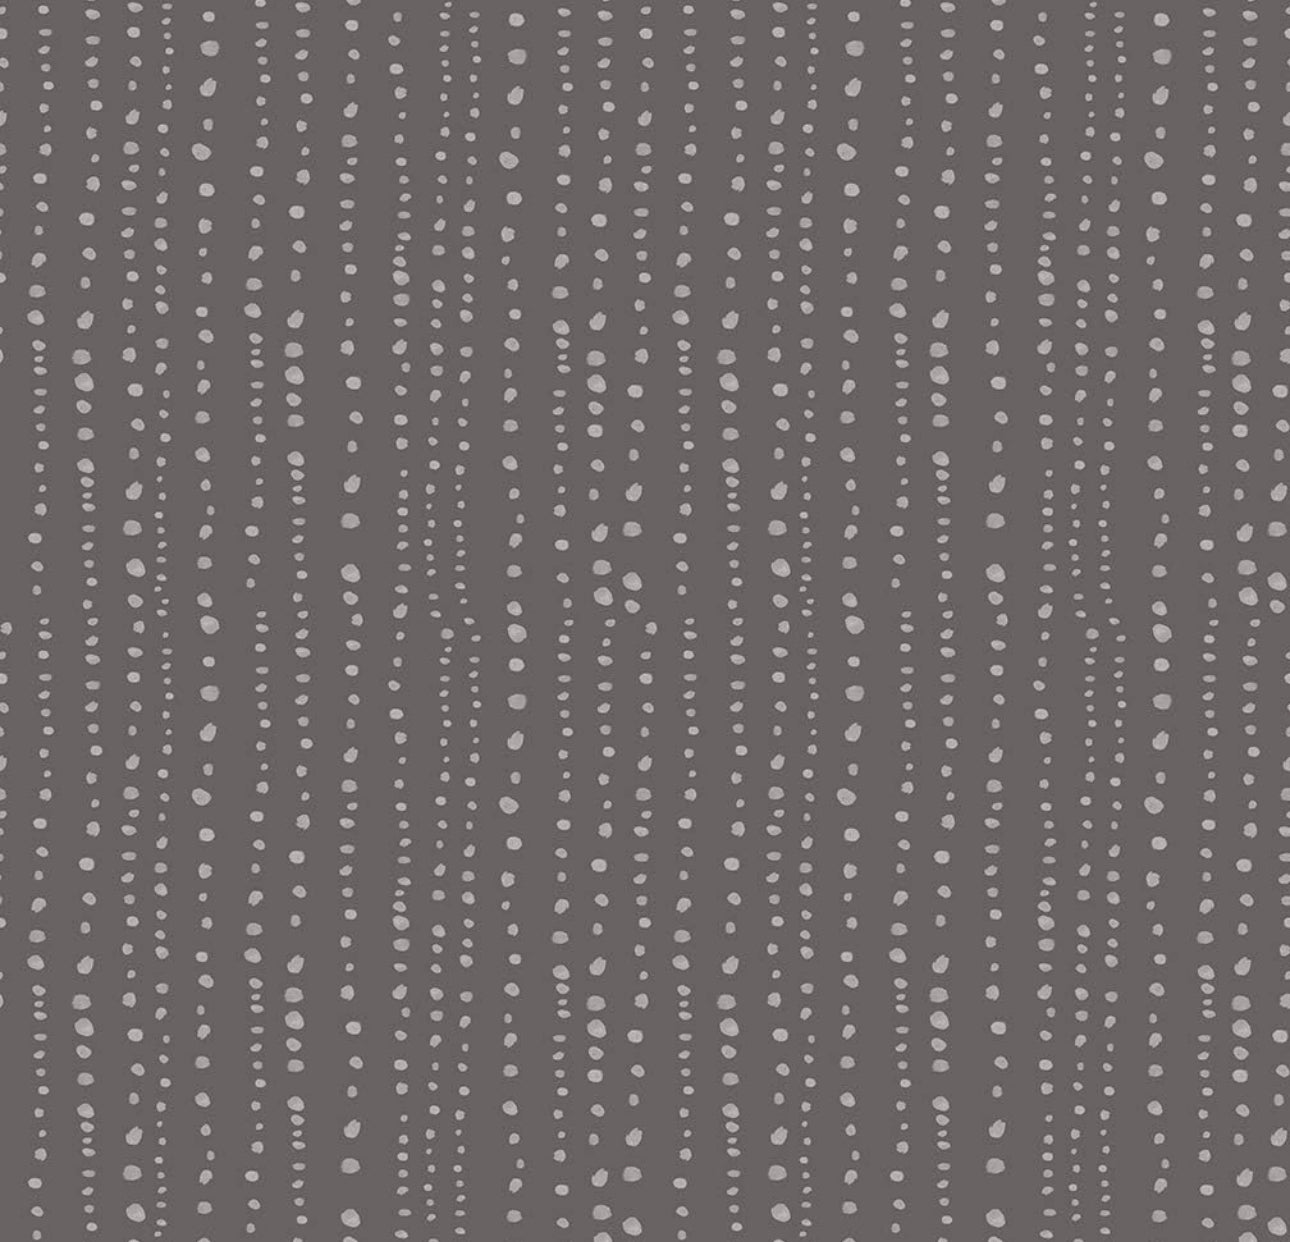 Flipside Grey Dots and Stripes Peel and Stick Removable Wallpaper - Each roll is 18 ft. Long x 18 in. Wide. - Safe for Walls - Easy to Apply & Easy to Remove